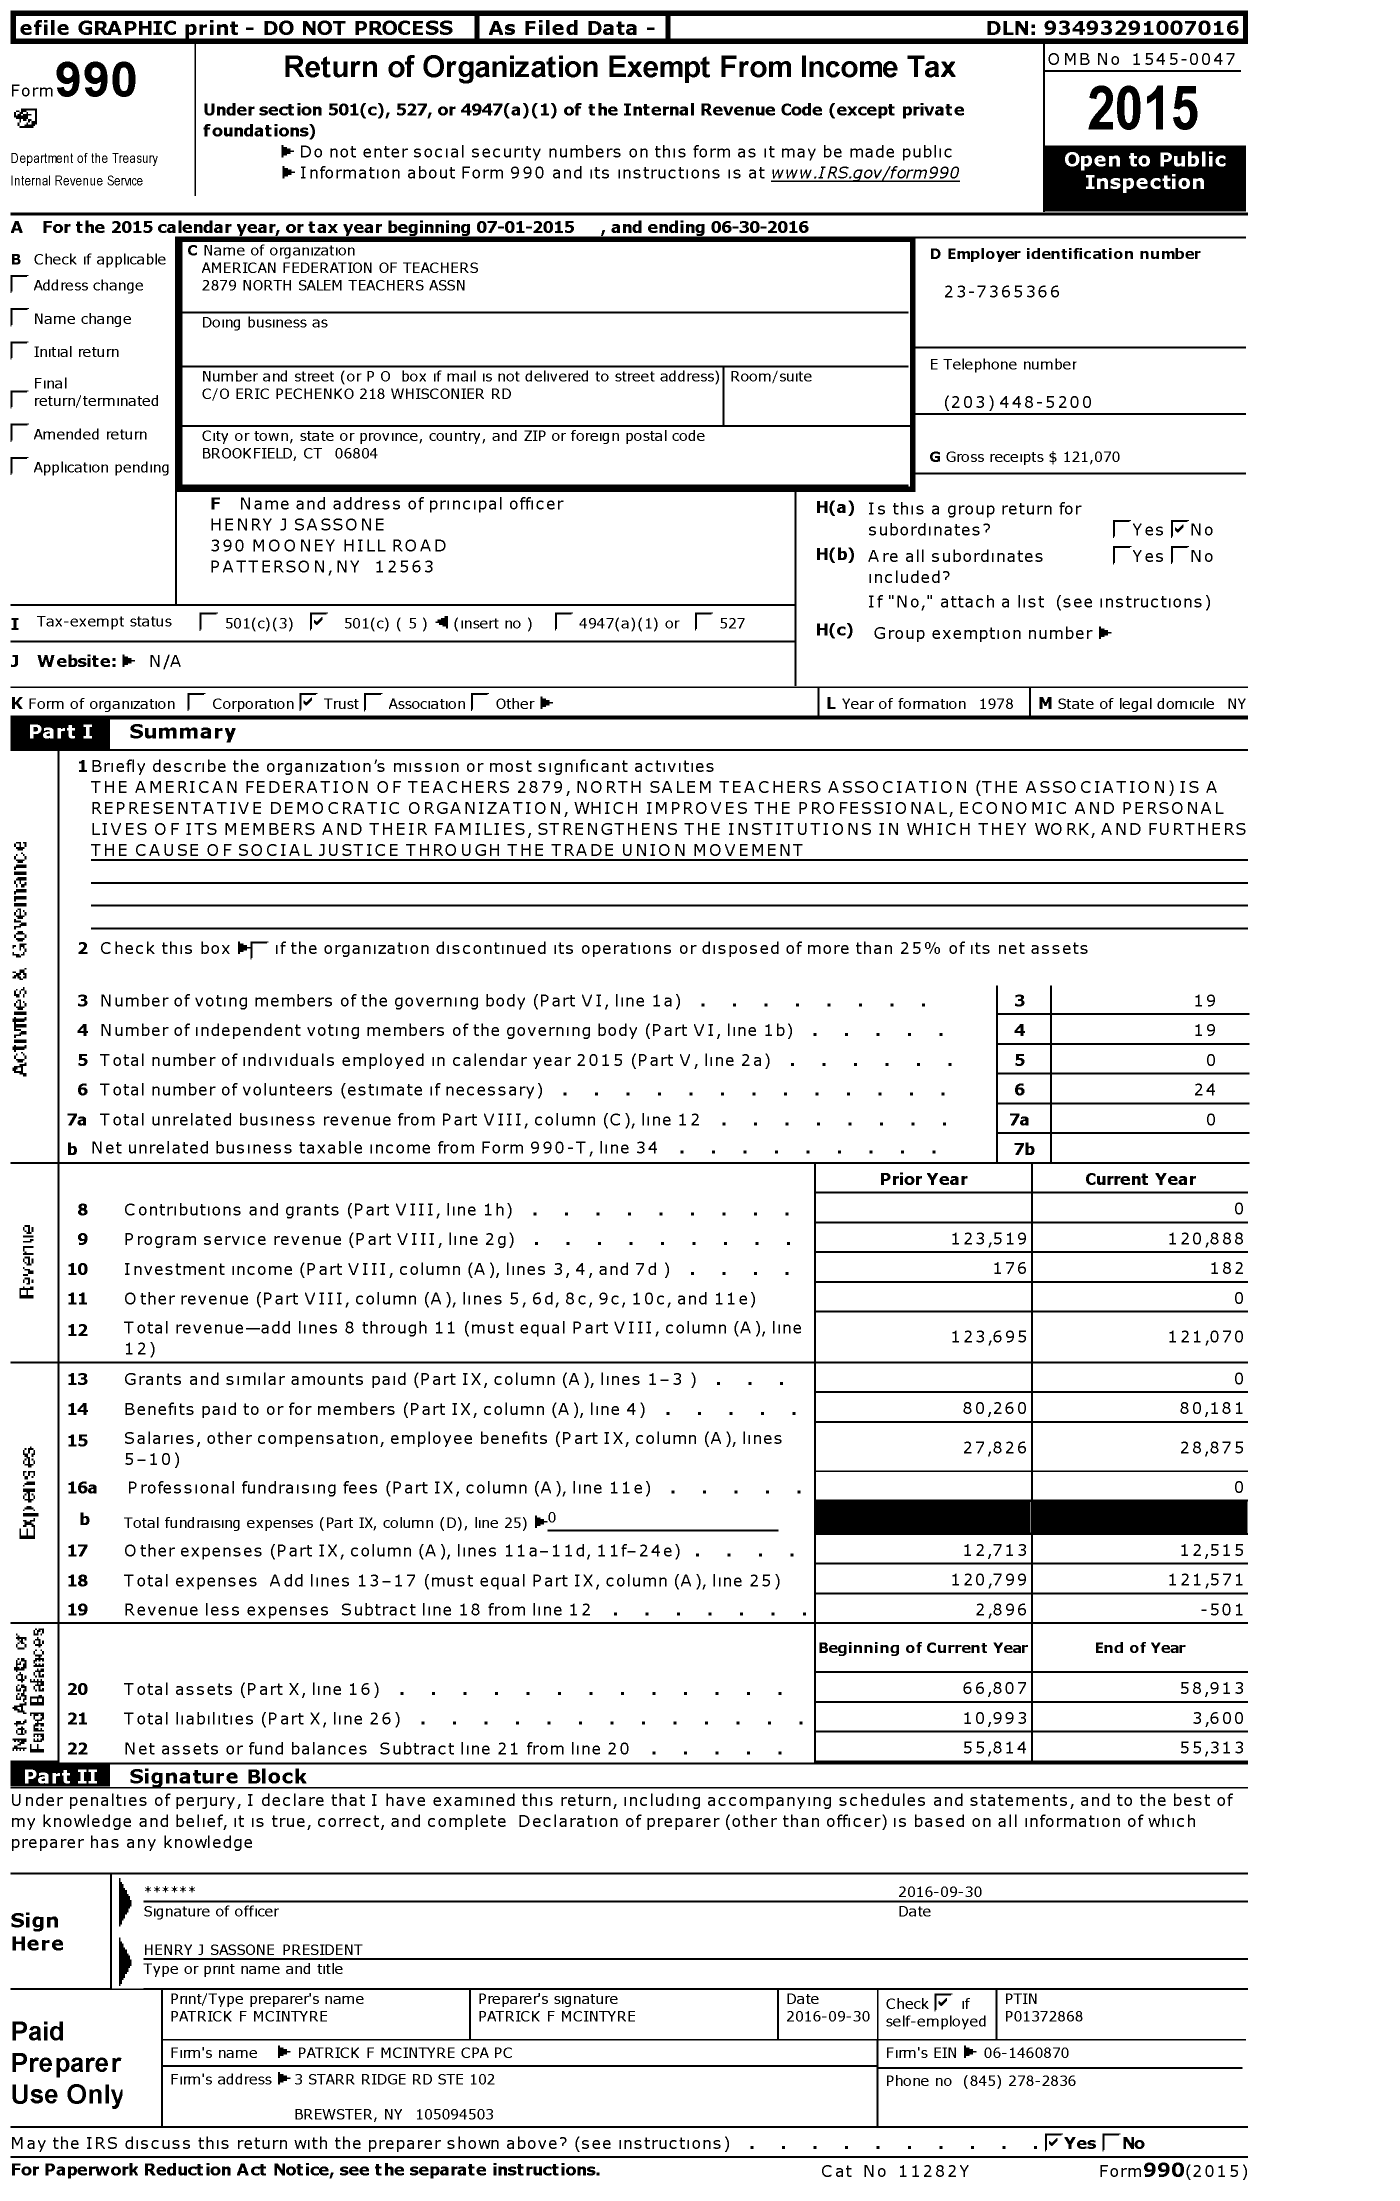 Image of first page of 2015 Form 990O for American Federation of Teachers 2879 North Salem Teachers Association